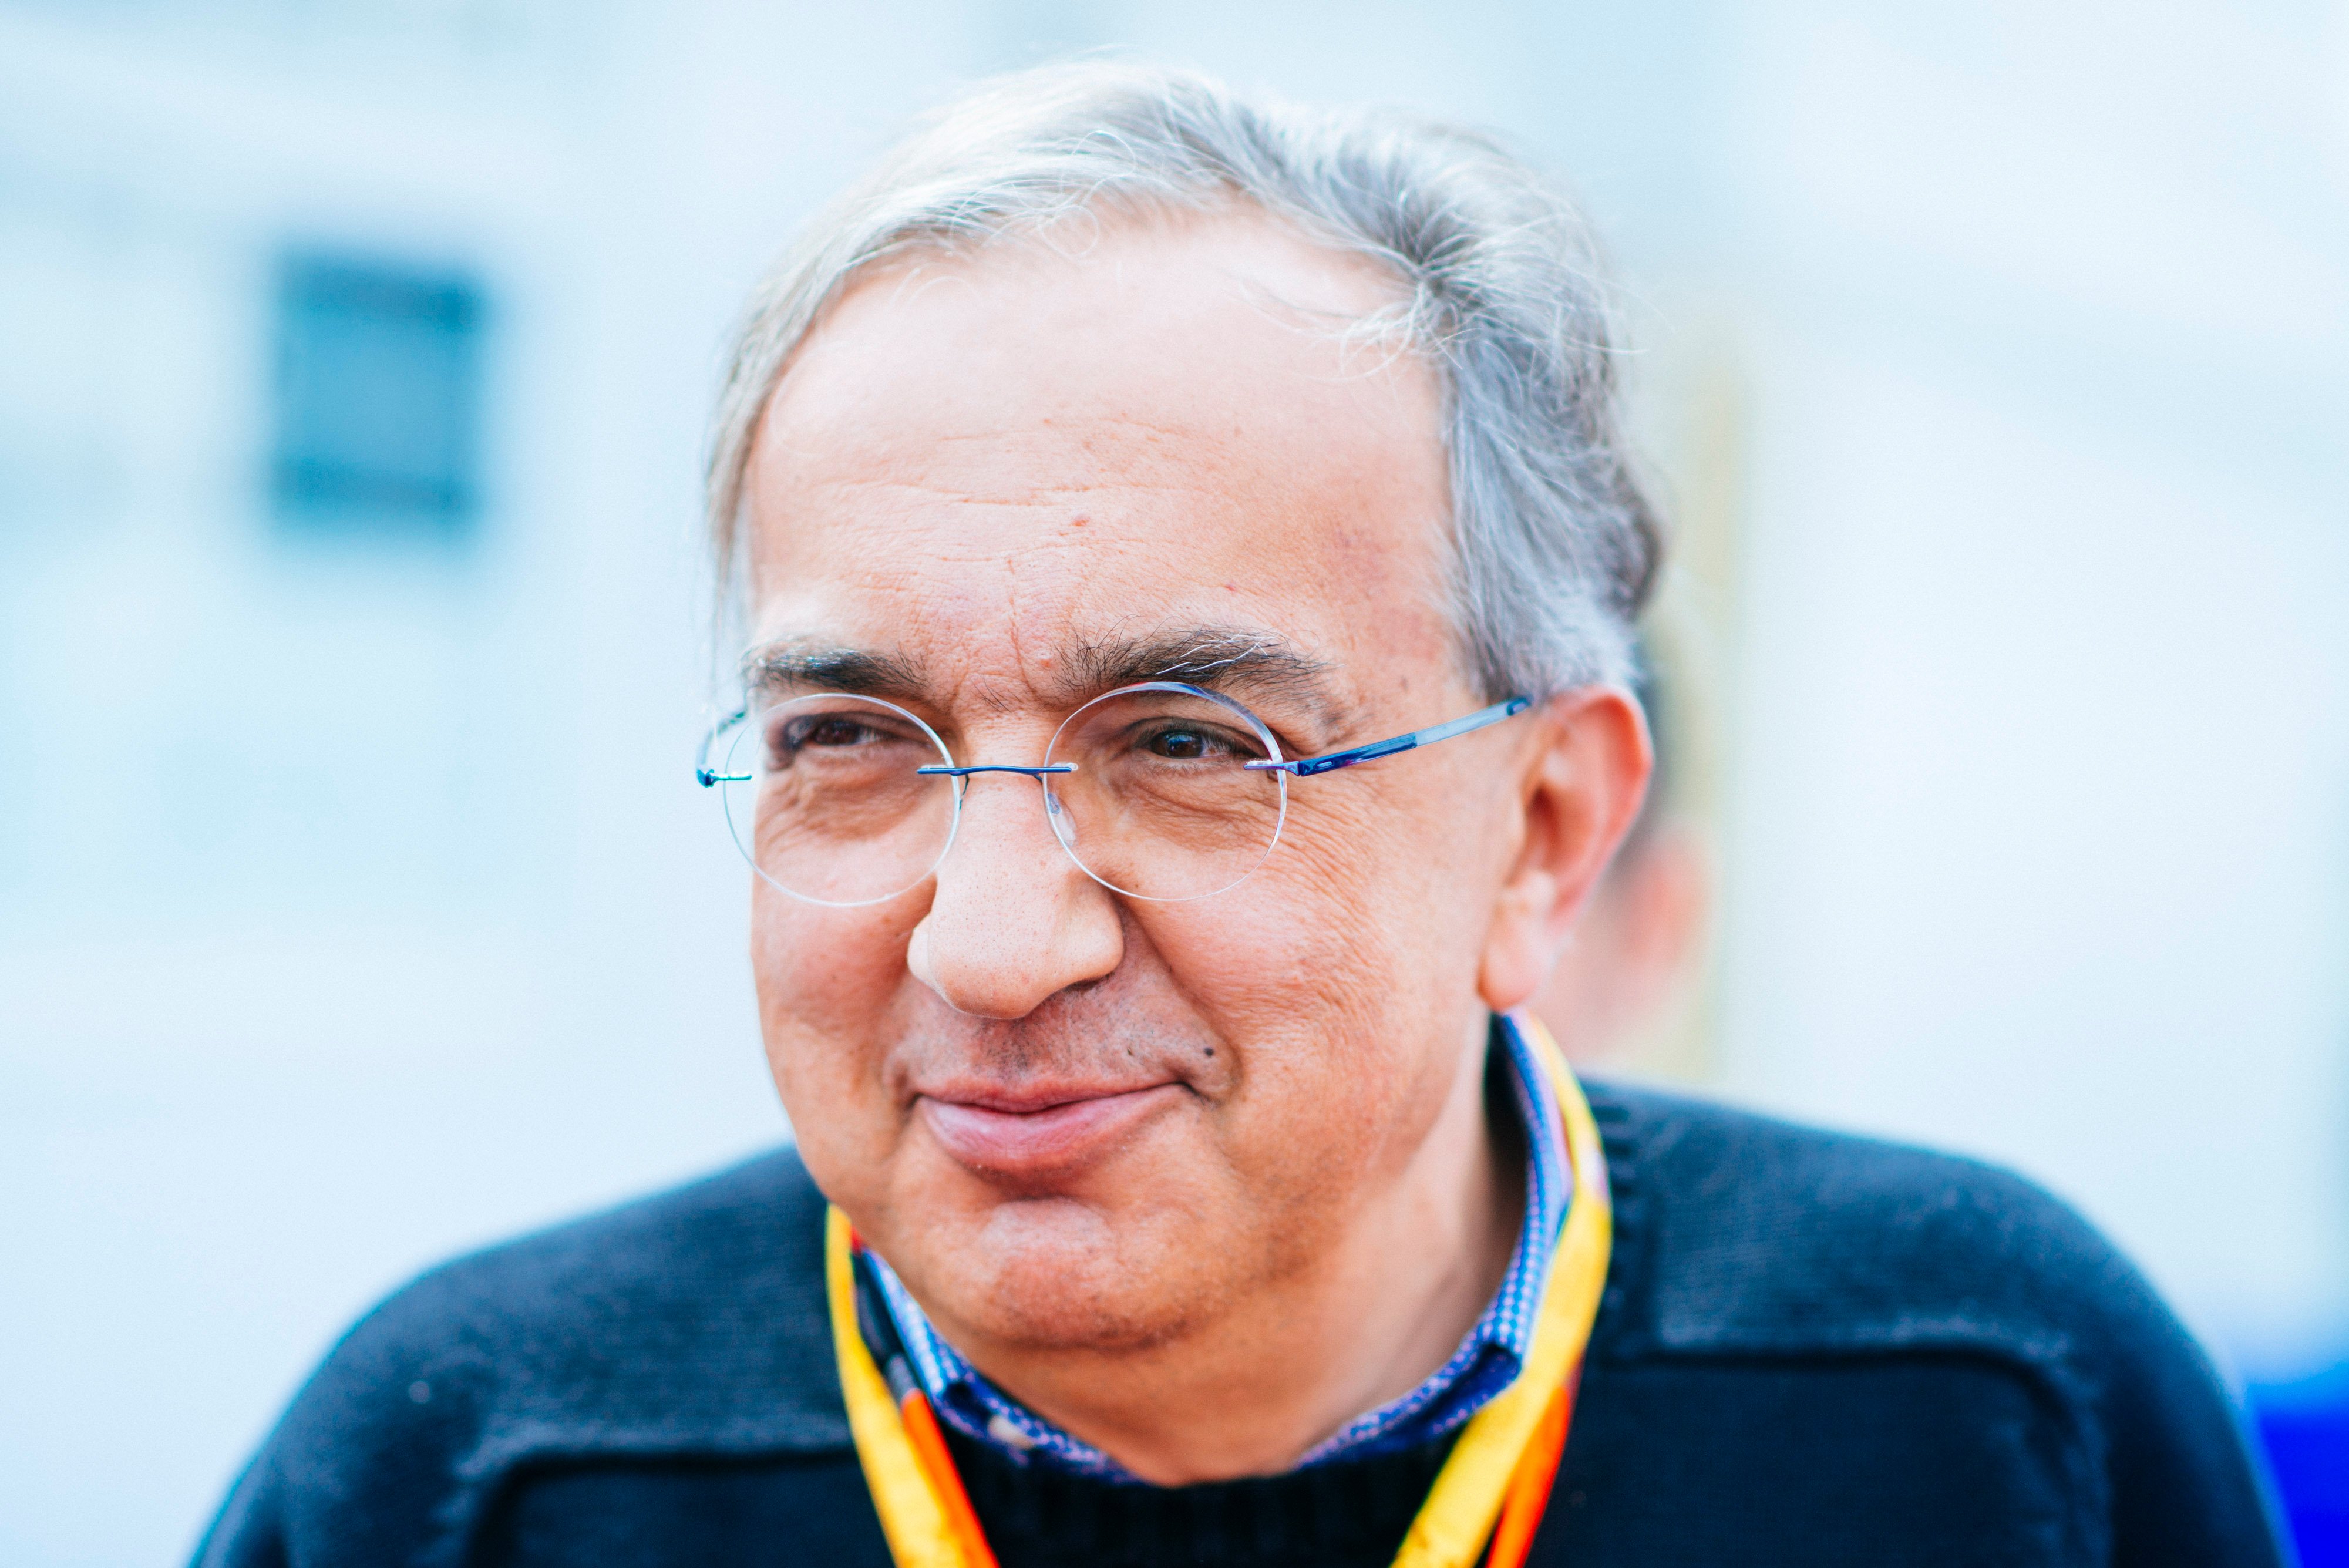 Marchionne out of FCA and Ferrari due to ailing health